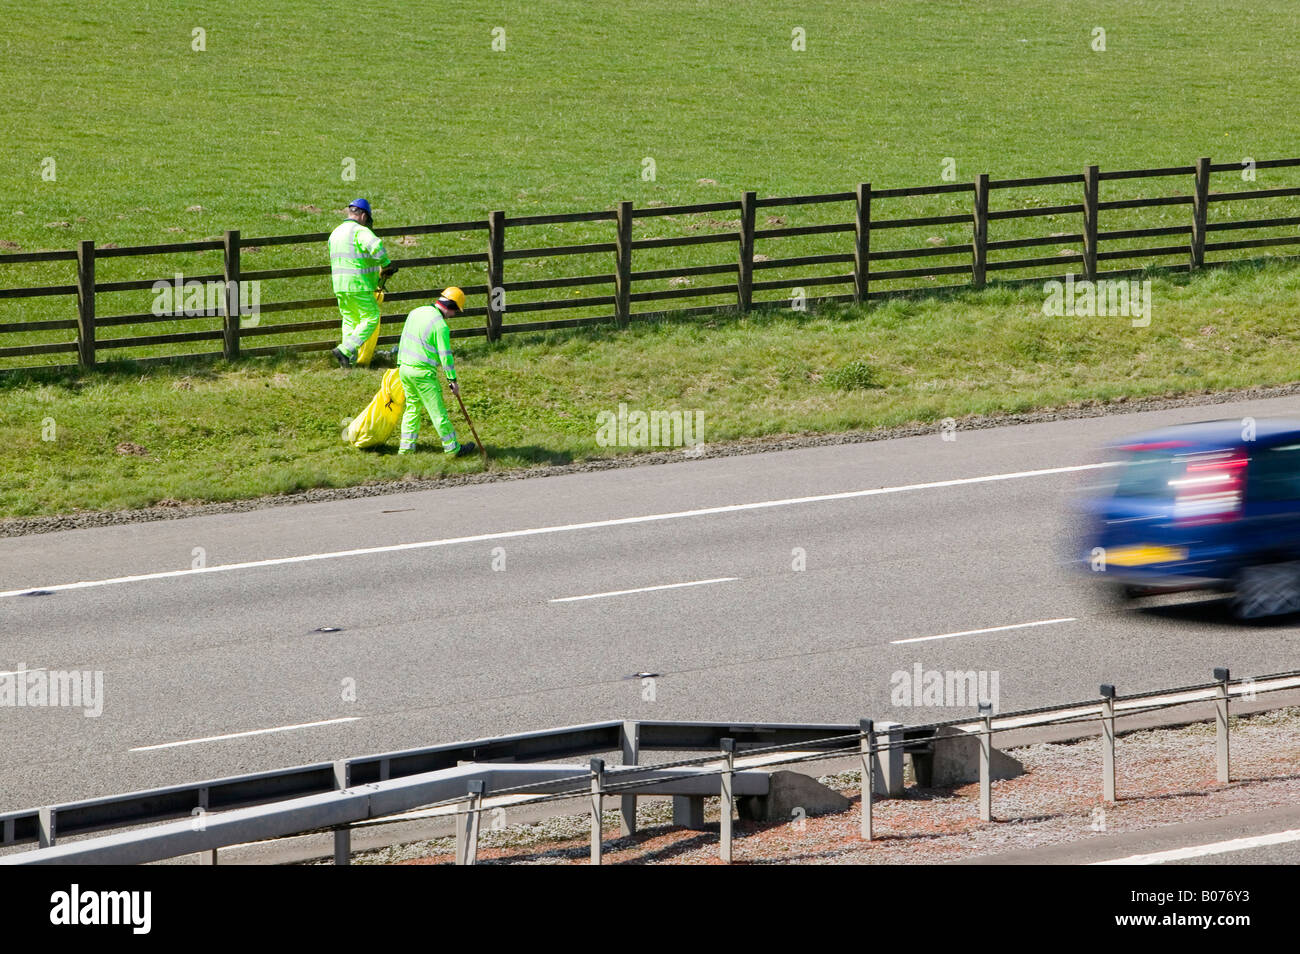 Council workers litter picking on the side of the M74 motorway at lockerbie Scotland UK Stock Photo